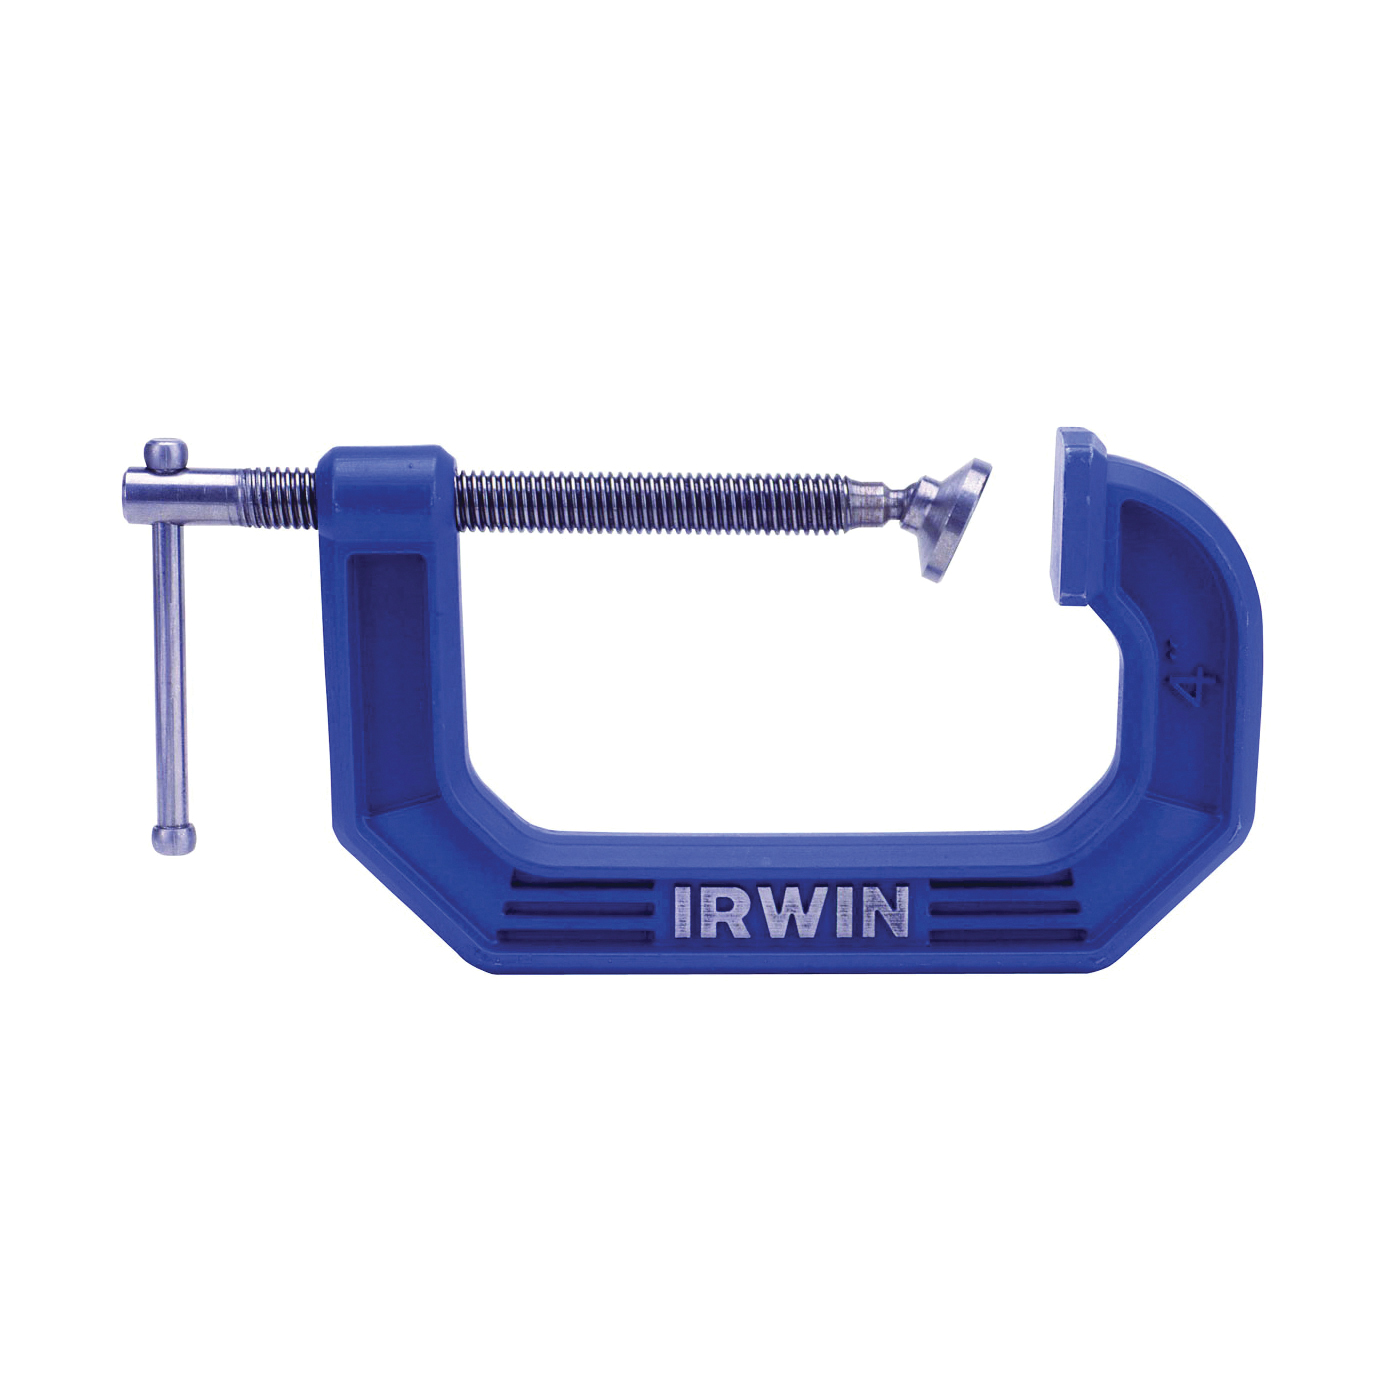 2025101 C-Clamp, 10 lb Clamping, 1-1/2 in Max Opening Size, 1-1/2 in D Throat, Steel Body, Blue Body